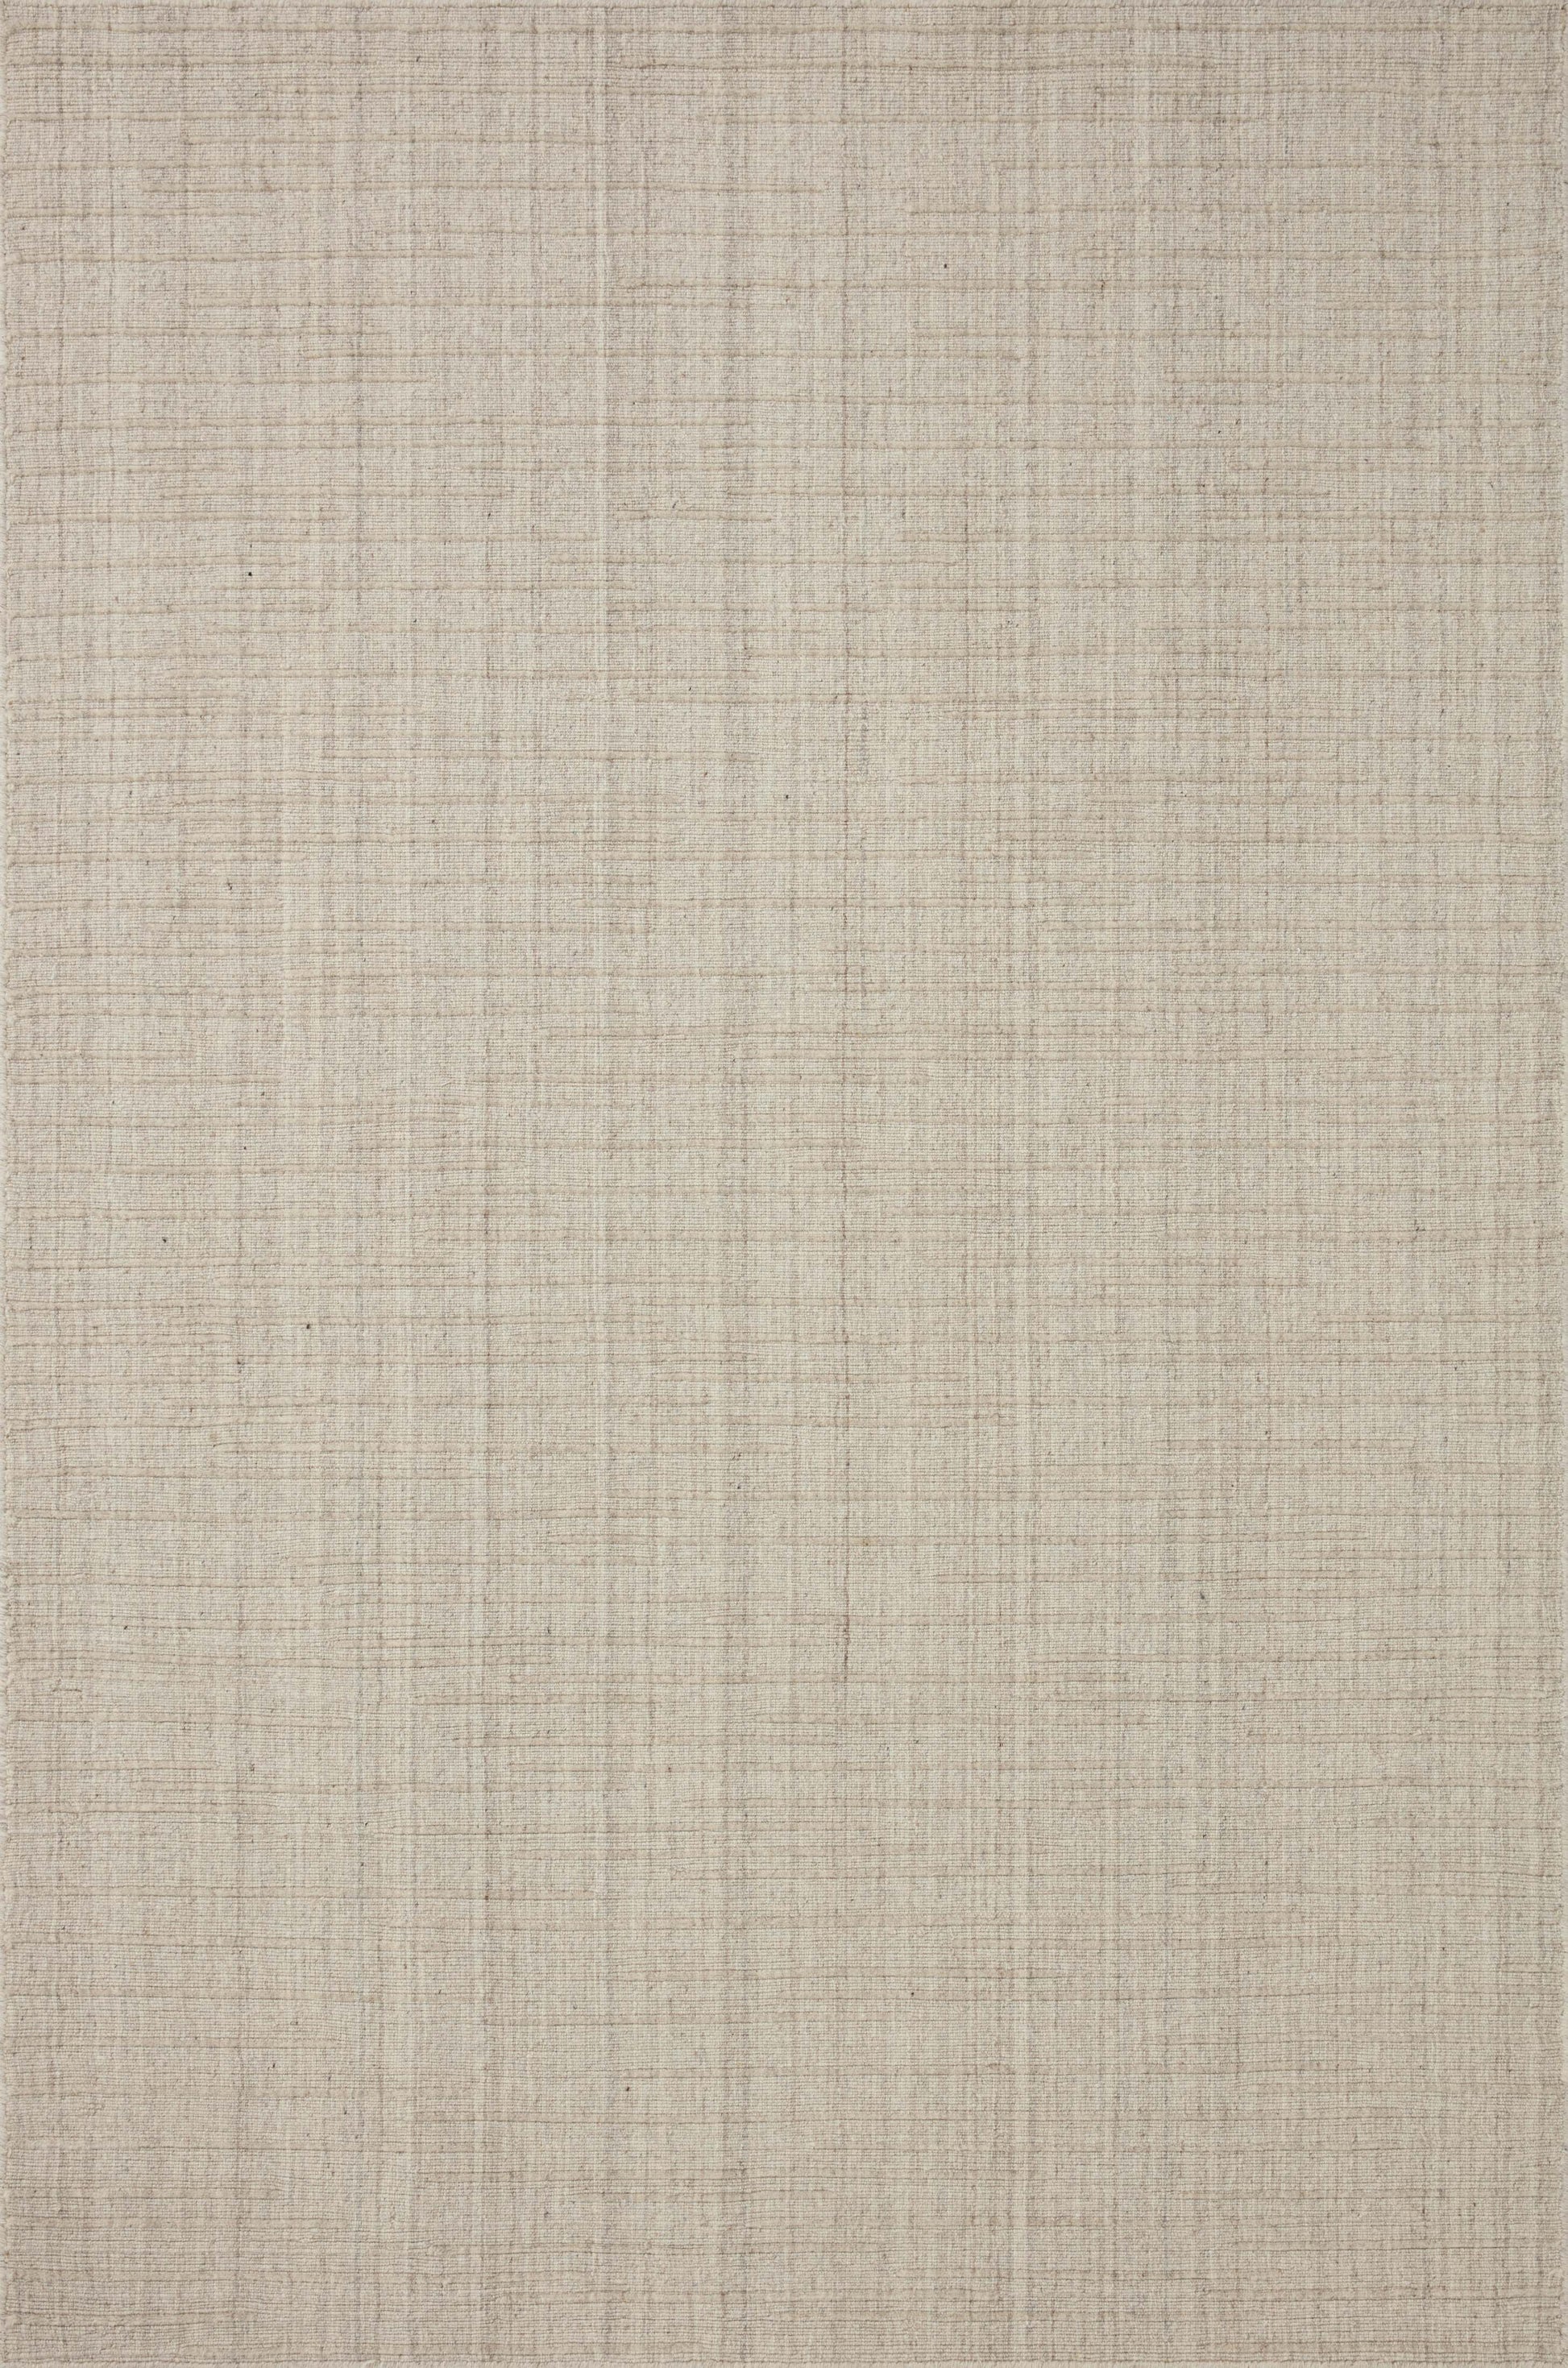 A picture of Loloi's Brooks rug, in style BRO-01, color Stone